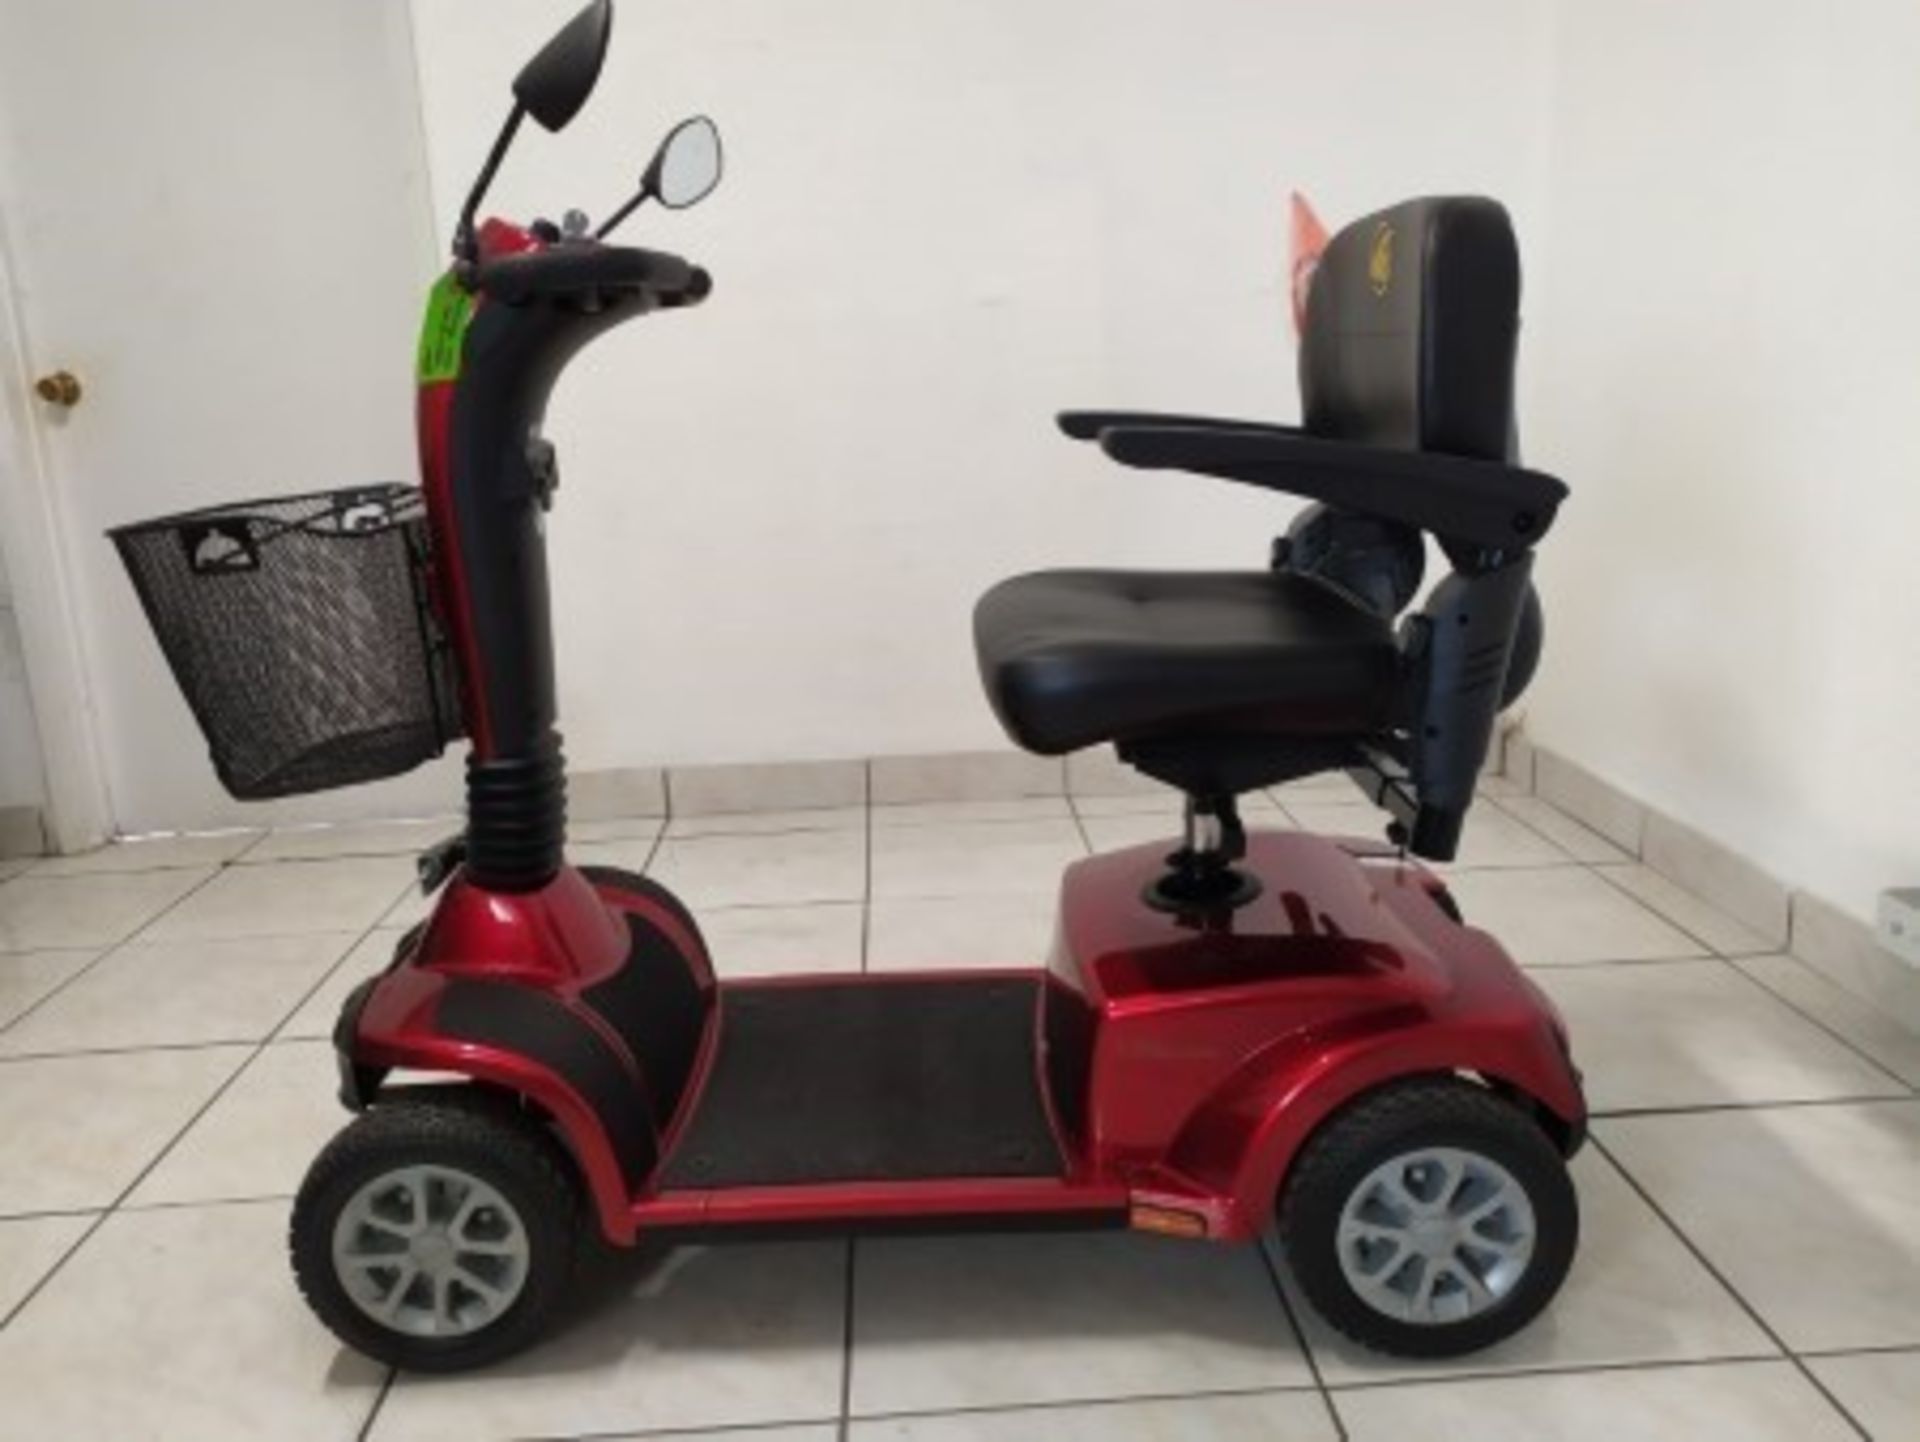 2017 GOLDEN COMPANION GC440 4-WHEEL SCOOTER WITH CHARGER, BASKET & COVER - RED - 400LB CAPACITY - SE - Image 2 of 6